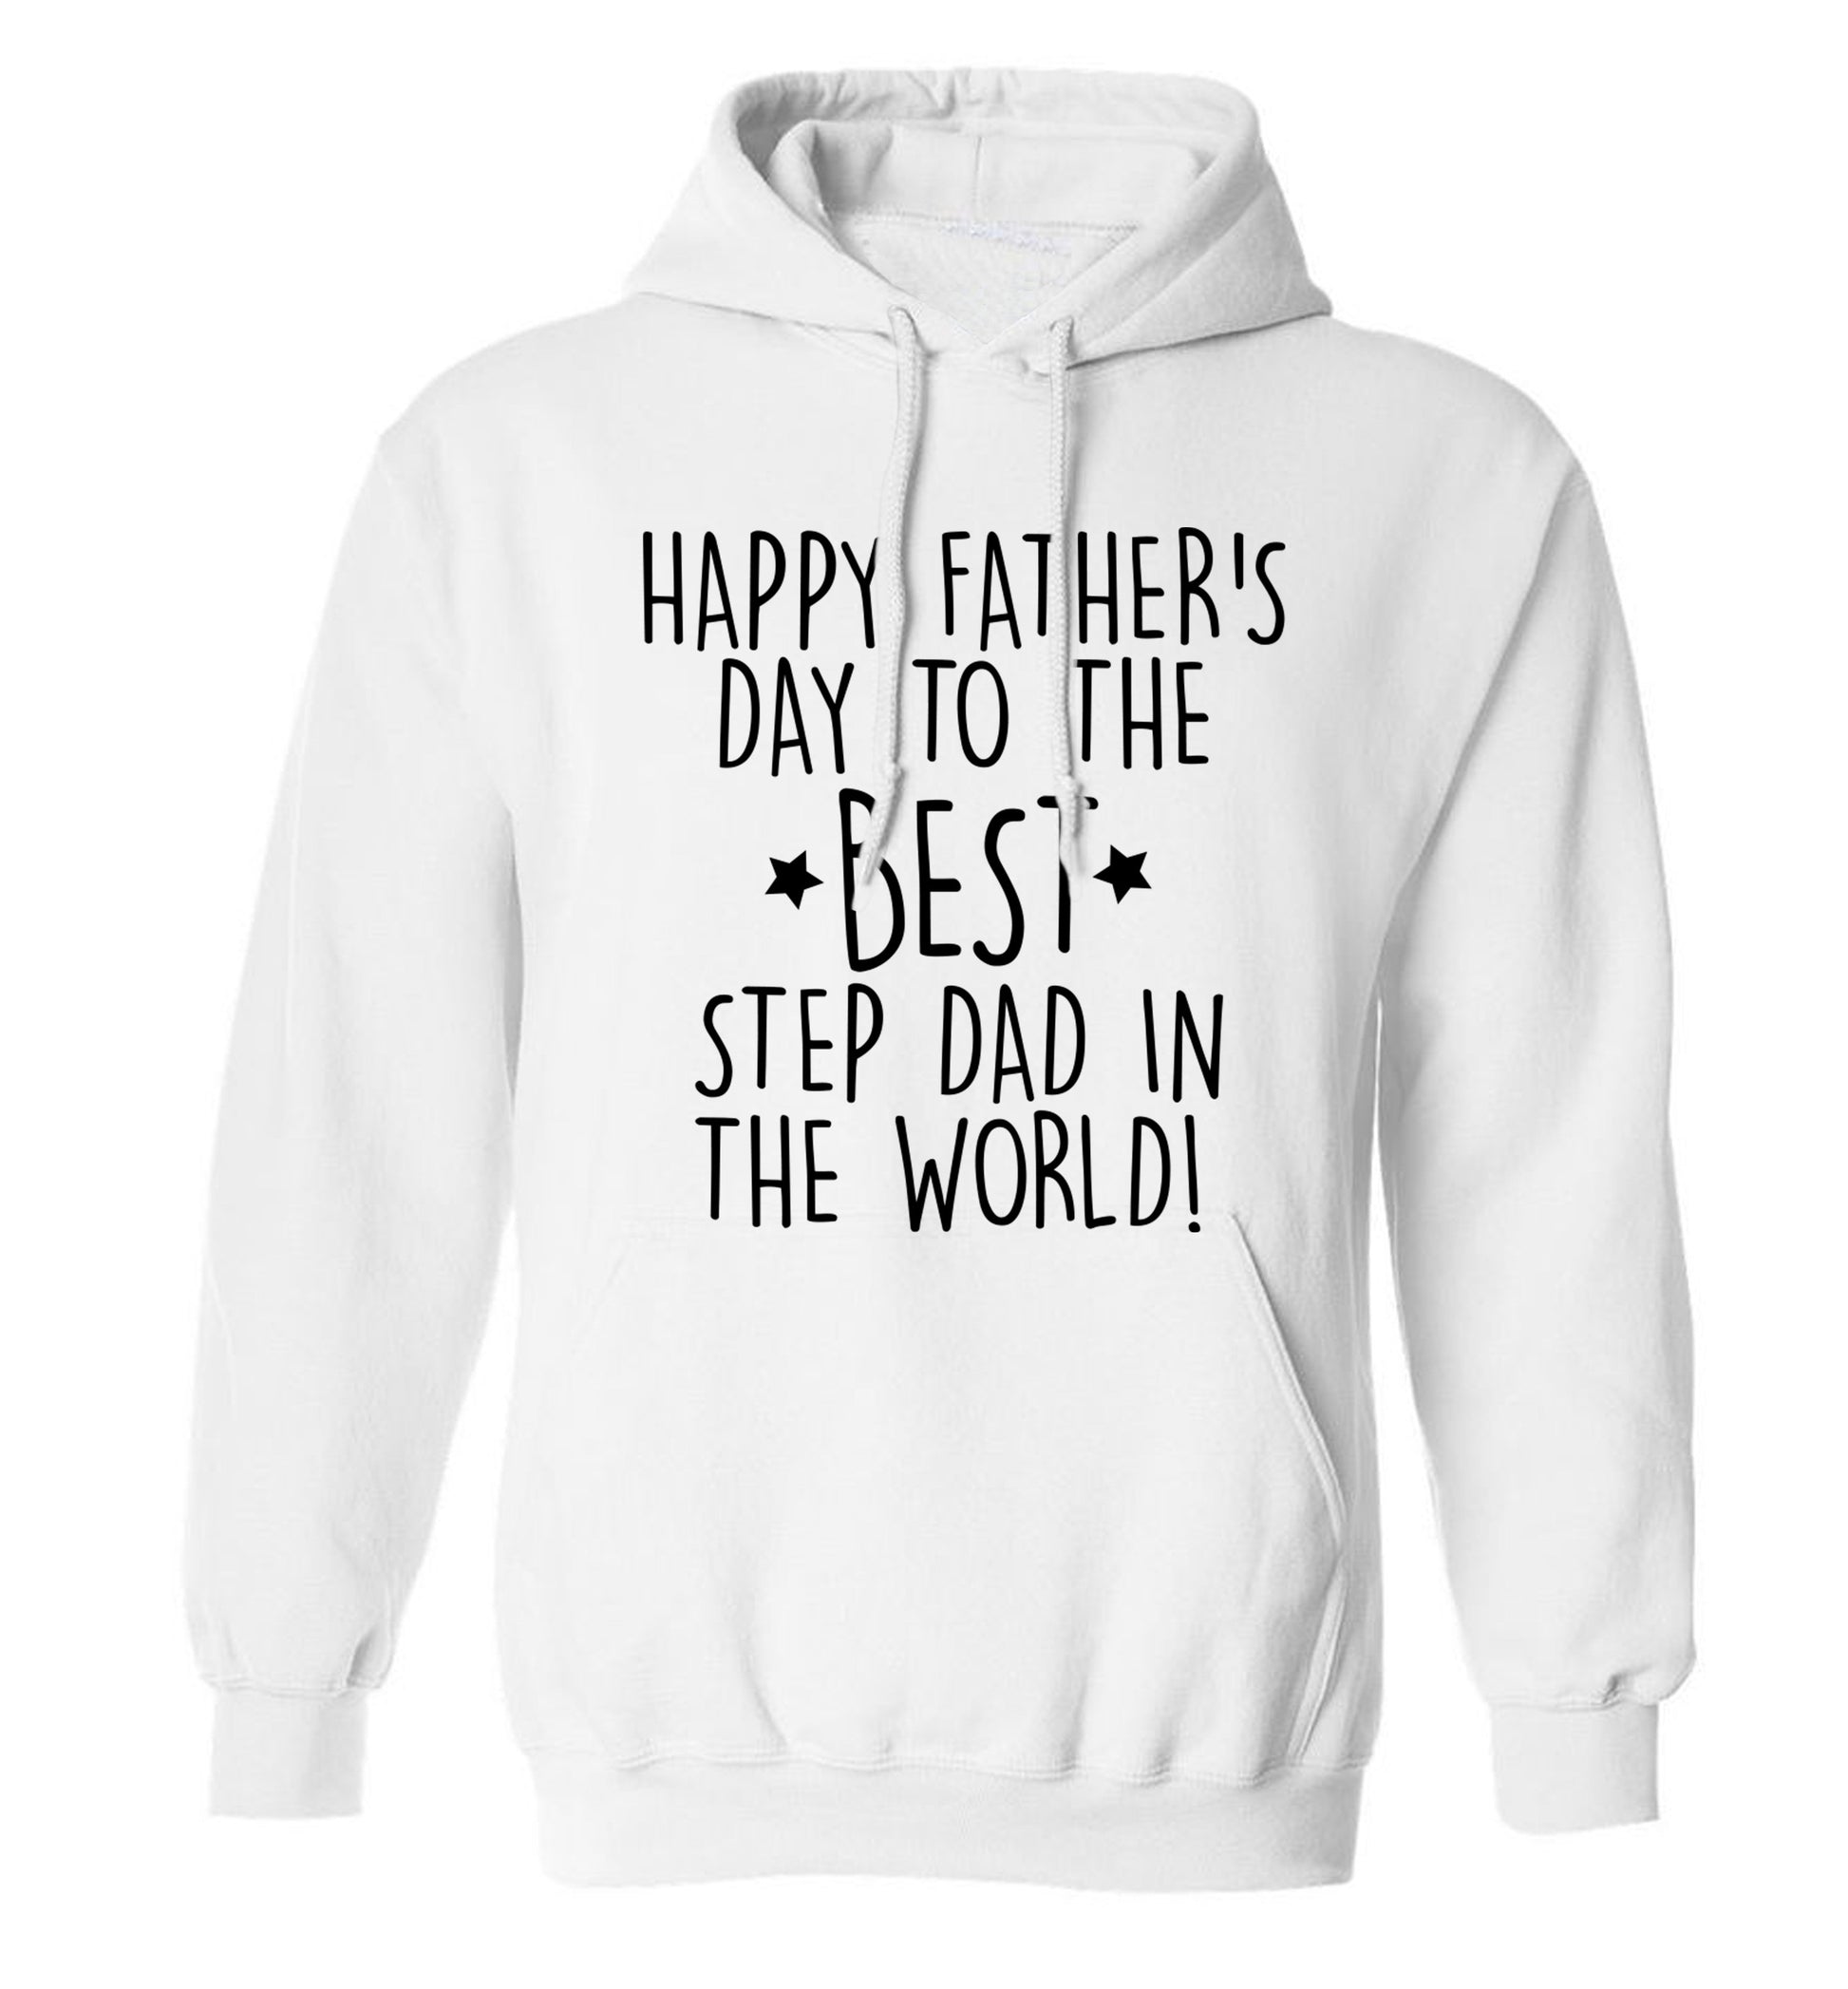 Happy Father's day to the best step dad in the world! adults unisex white hoodie 2XL